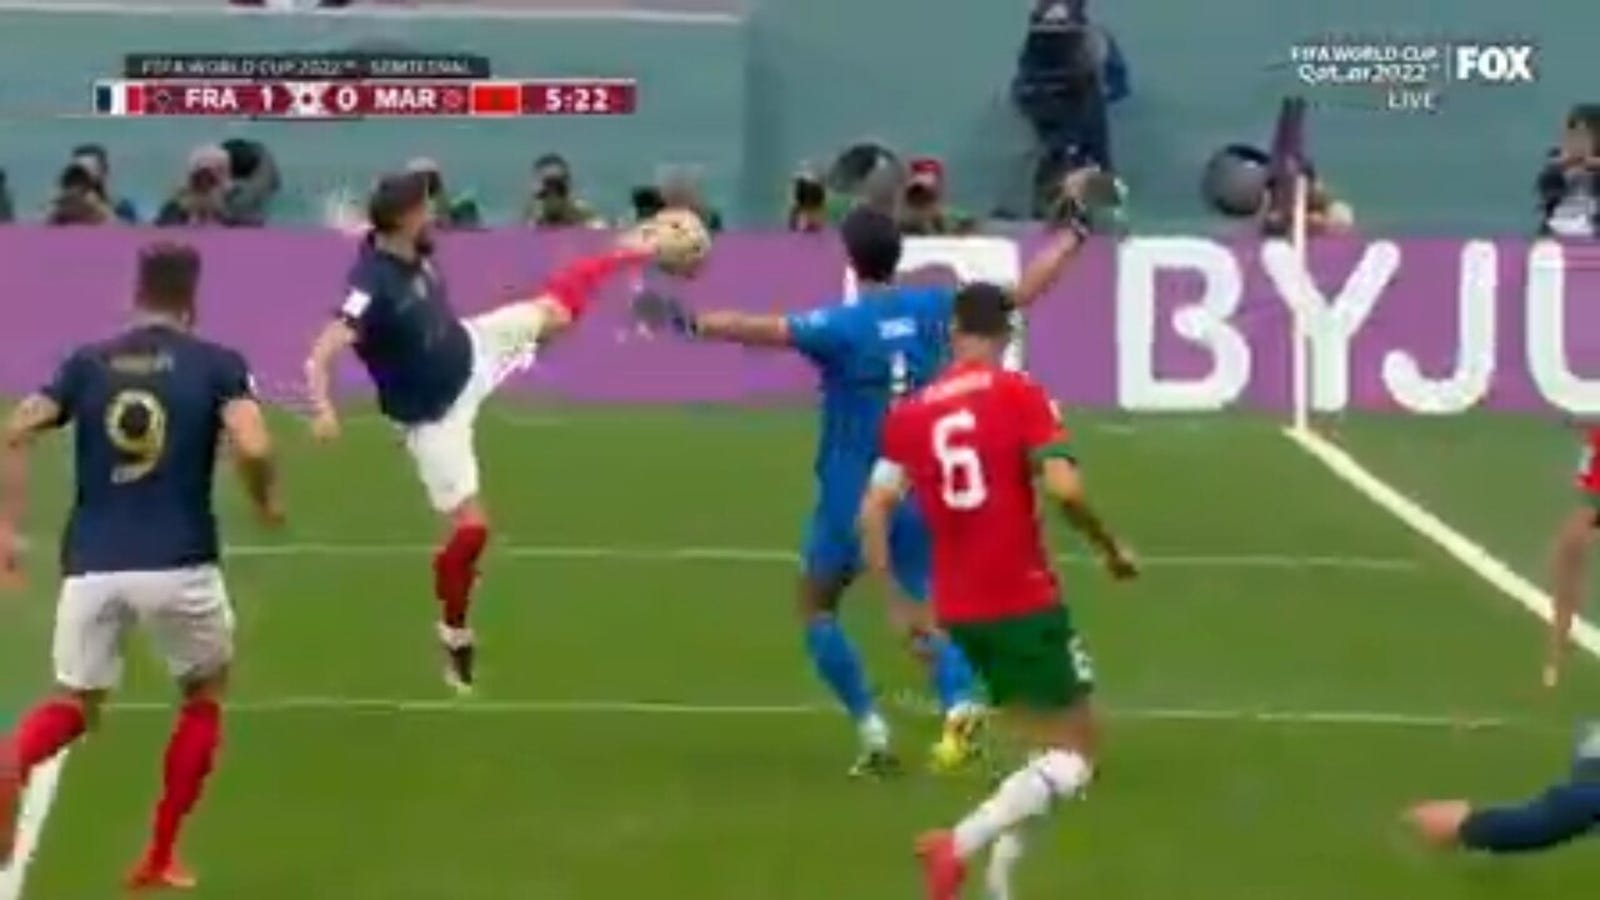 France's Theo Hernandez scores against Morocco in 5'